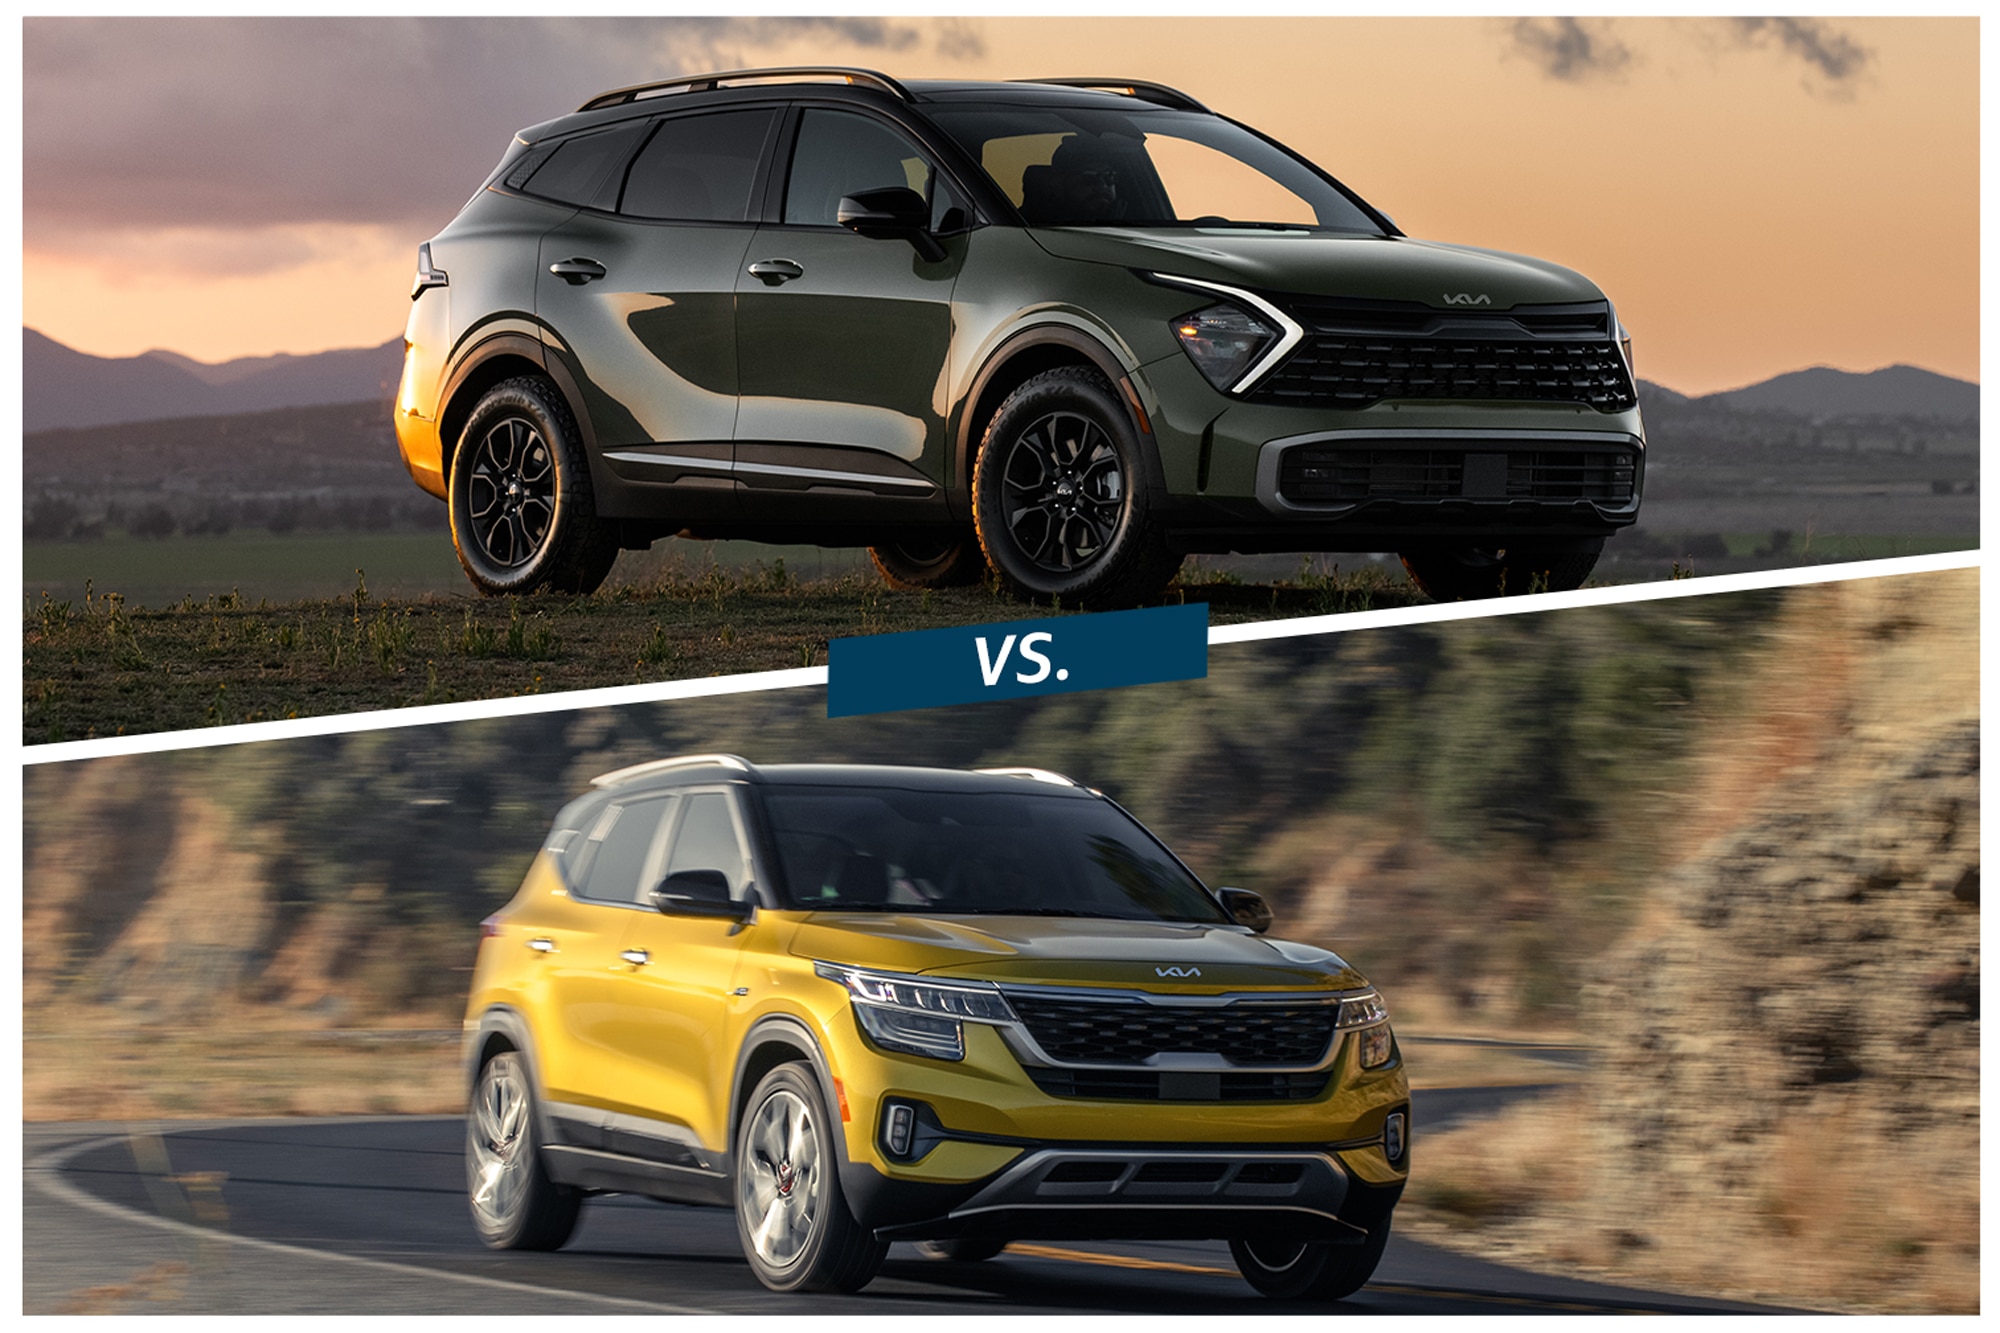 2023 Green Kia Sportage in the mountains and 2023 Yellow Kia Seltos on highway compared